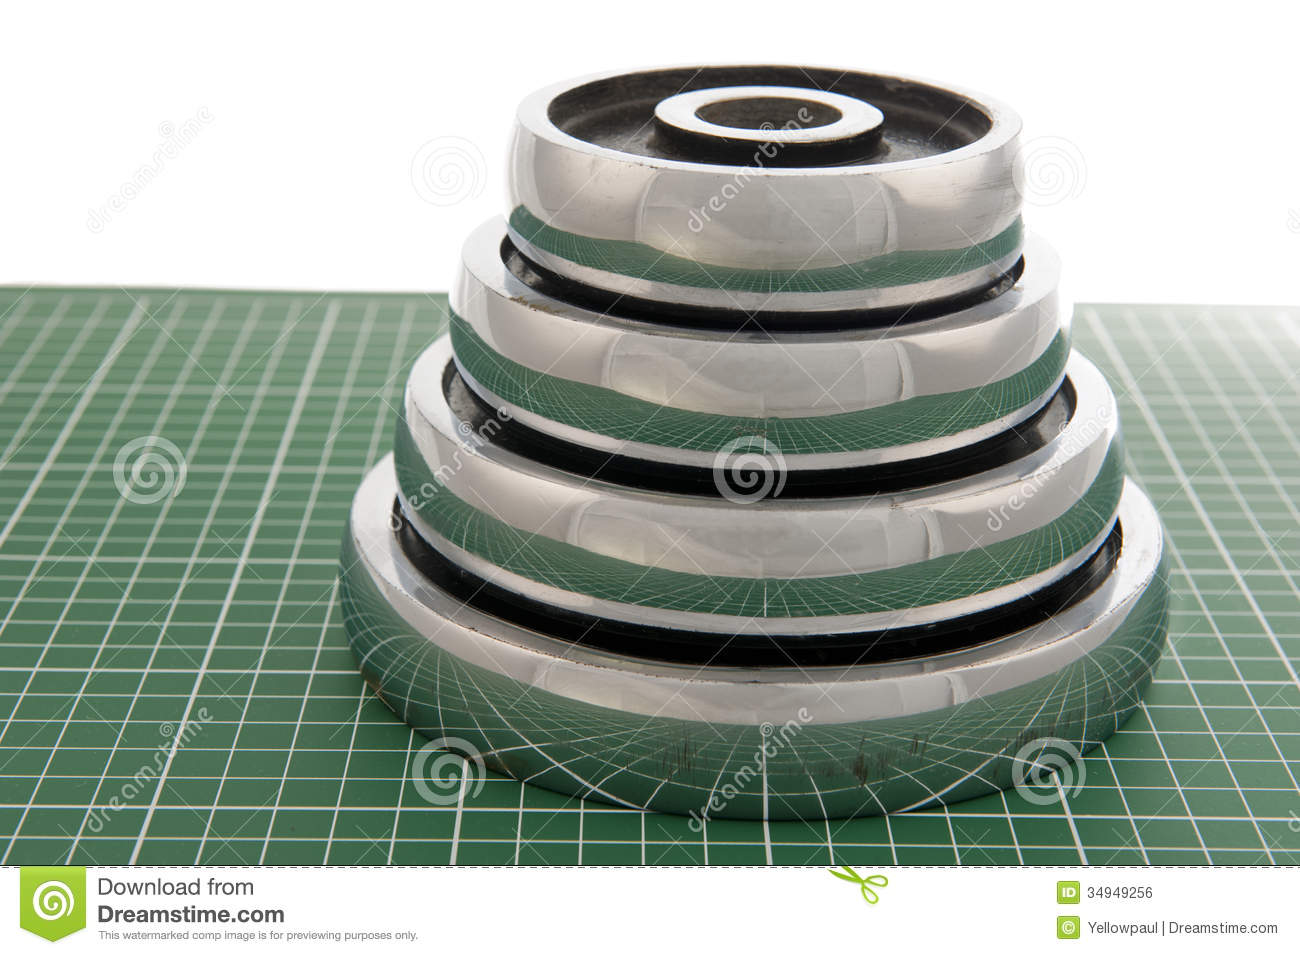 Dumb Bell Weights On Green Floor Royalty Free Stock Image   Image    